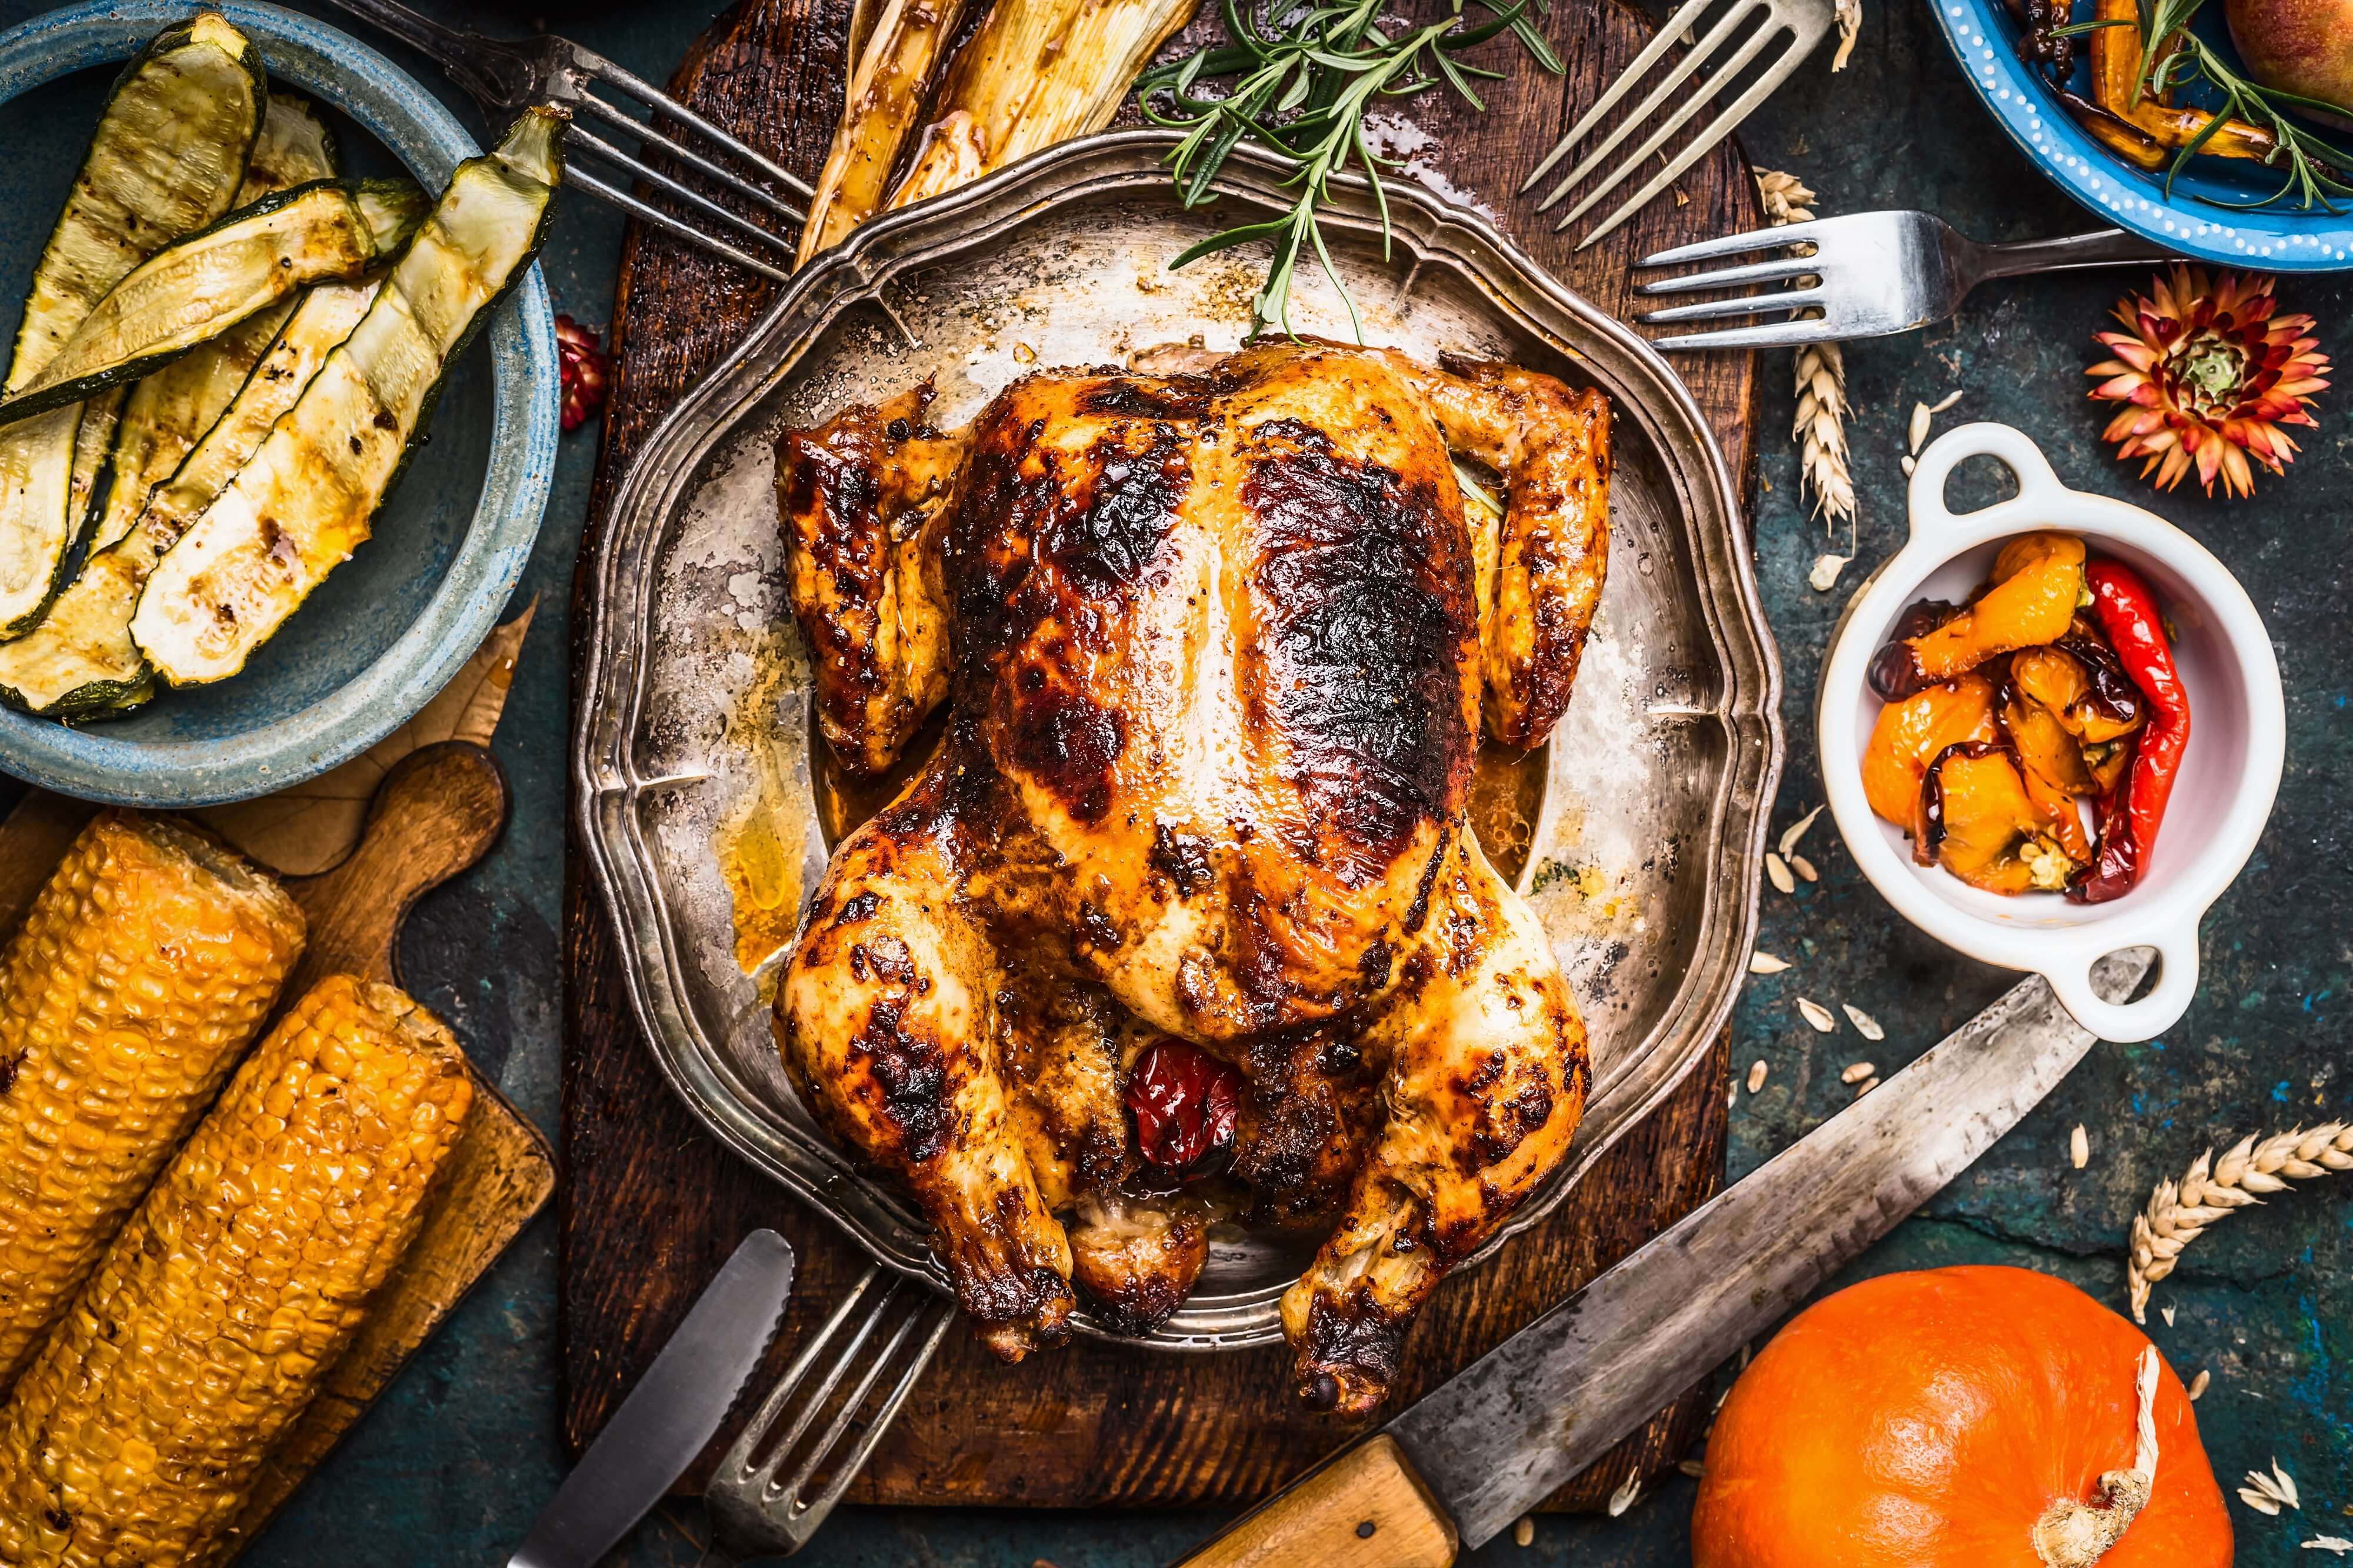 Roasted  whole turkey or chicken with organic harvest vegetables and pumpkin for Thanksgiving dinner on rustic table background, top view